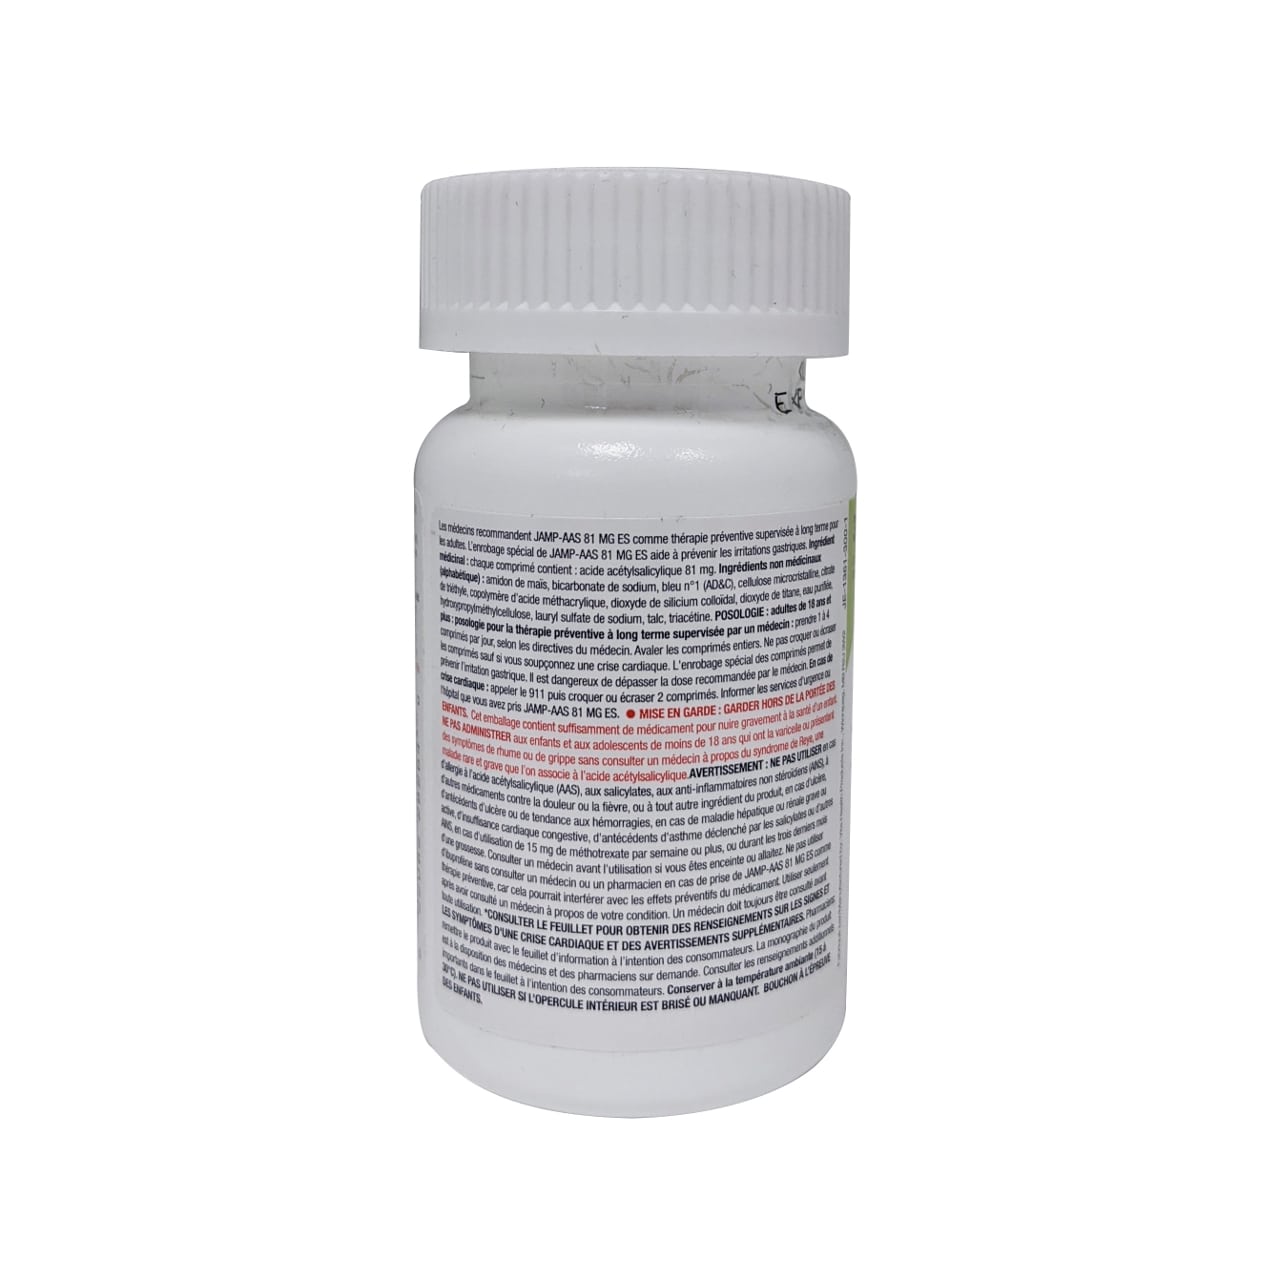 Product details, ingredients, dosage and warnings for JAMP Acetylsalicylic Acid 81mg Delayed Release Tablets in French